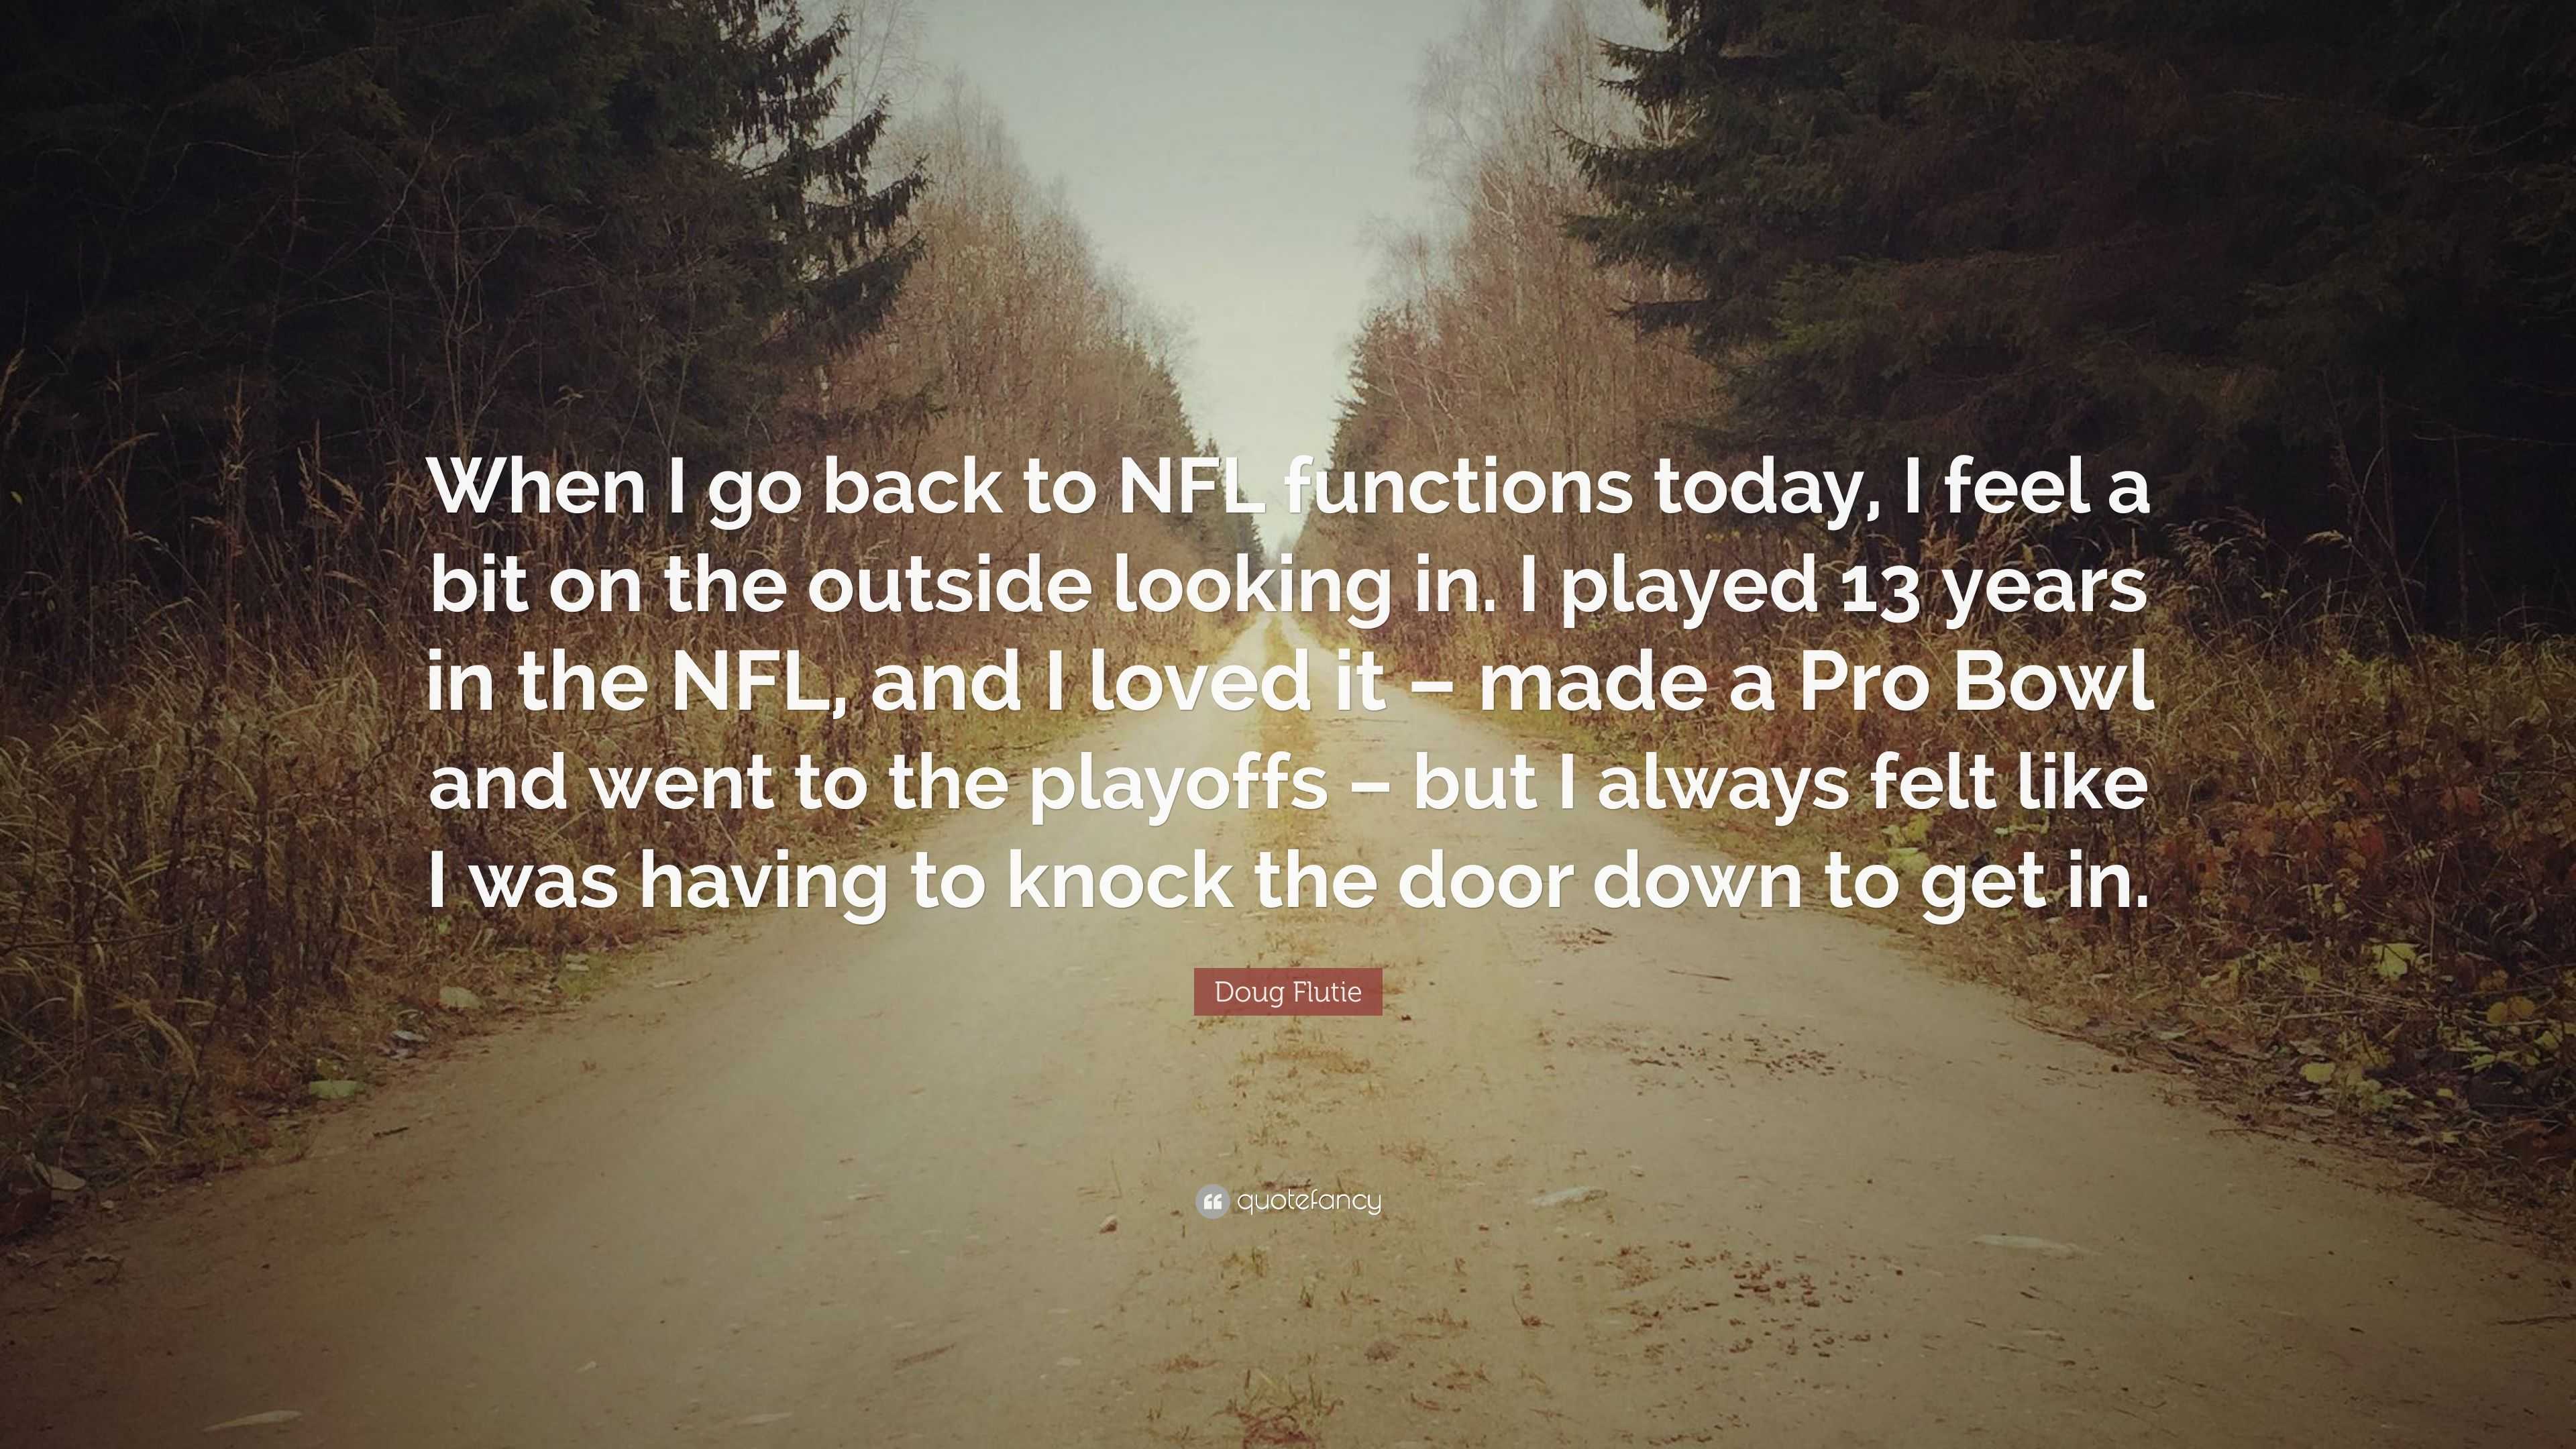 Doug Flutie Quote When I Go Back To NFL Functions Today I Feel A Bit On The Outside Looking